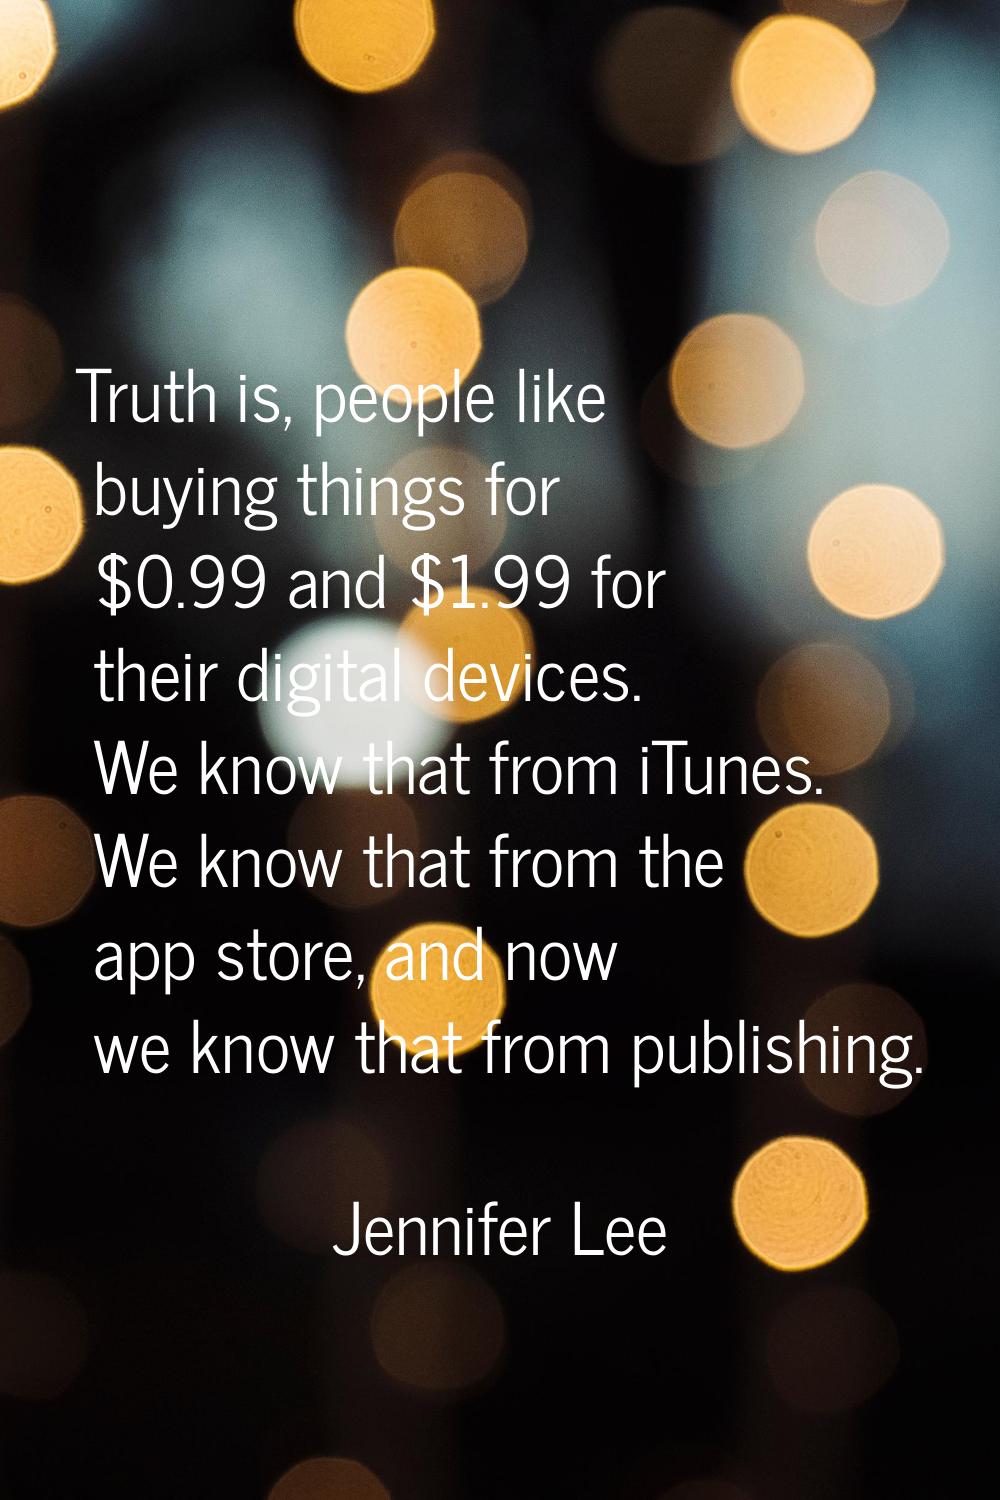 Truth is, people like buying things for $0.99 and $1.99 for their digital devices. We know that fro